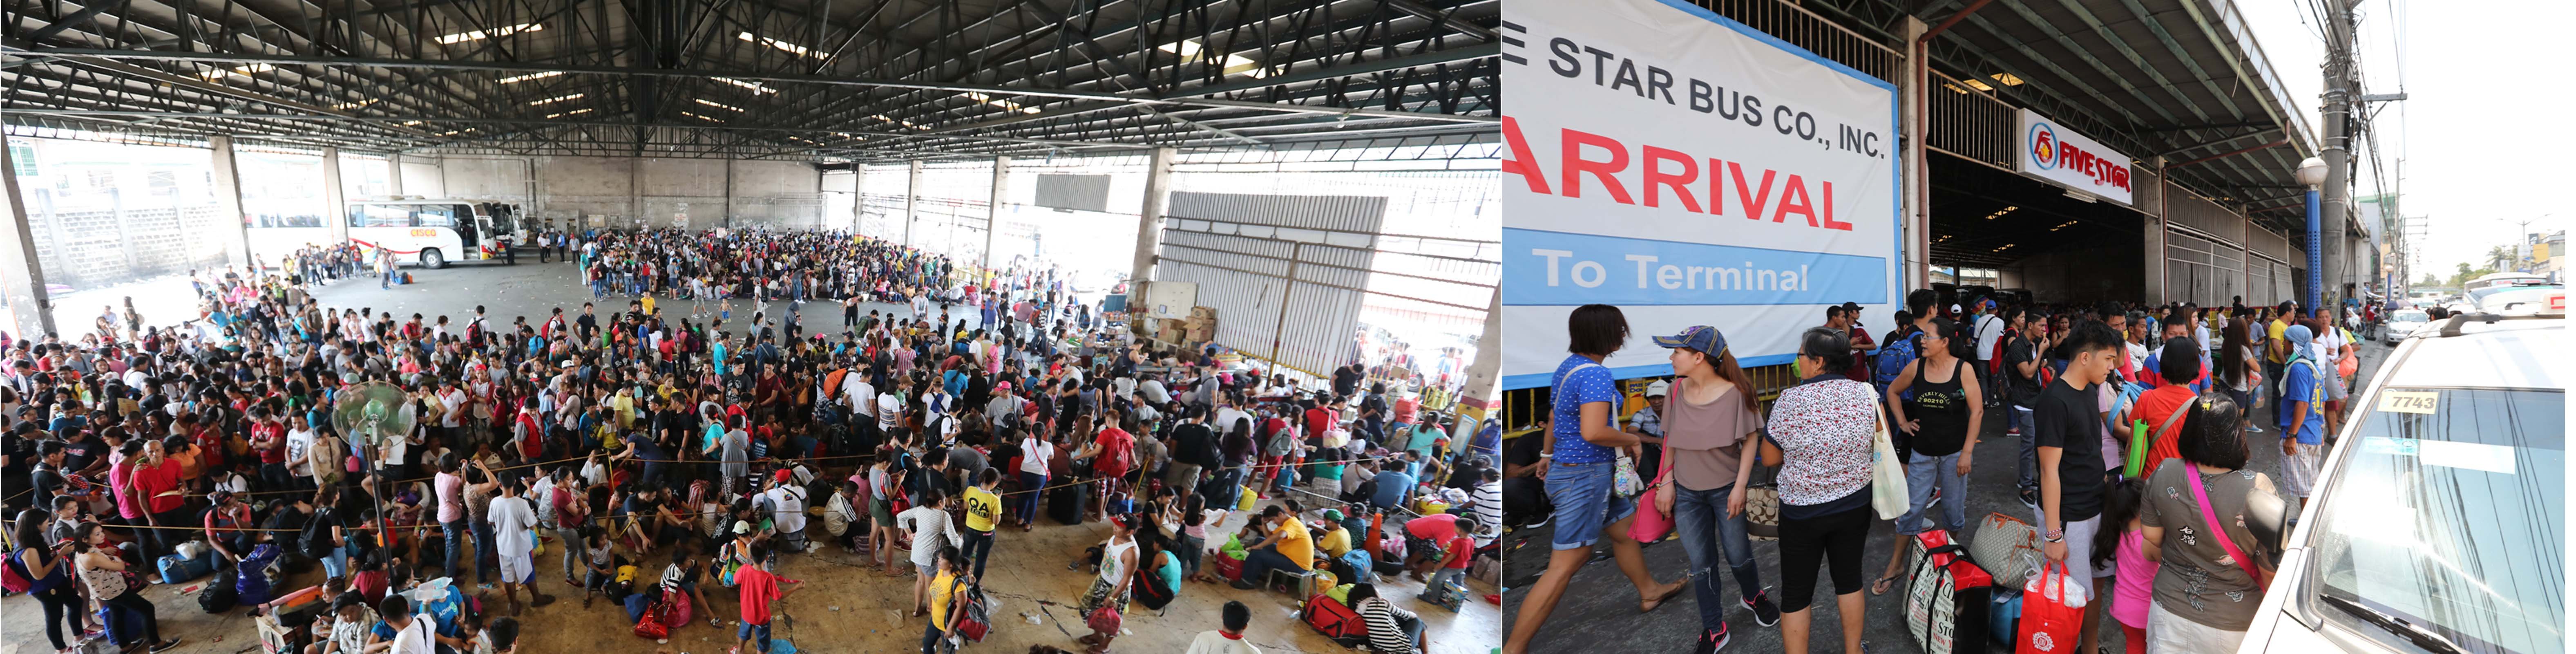 Huge volume of passengers stranded going to Pangasinan since Wednesday night